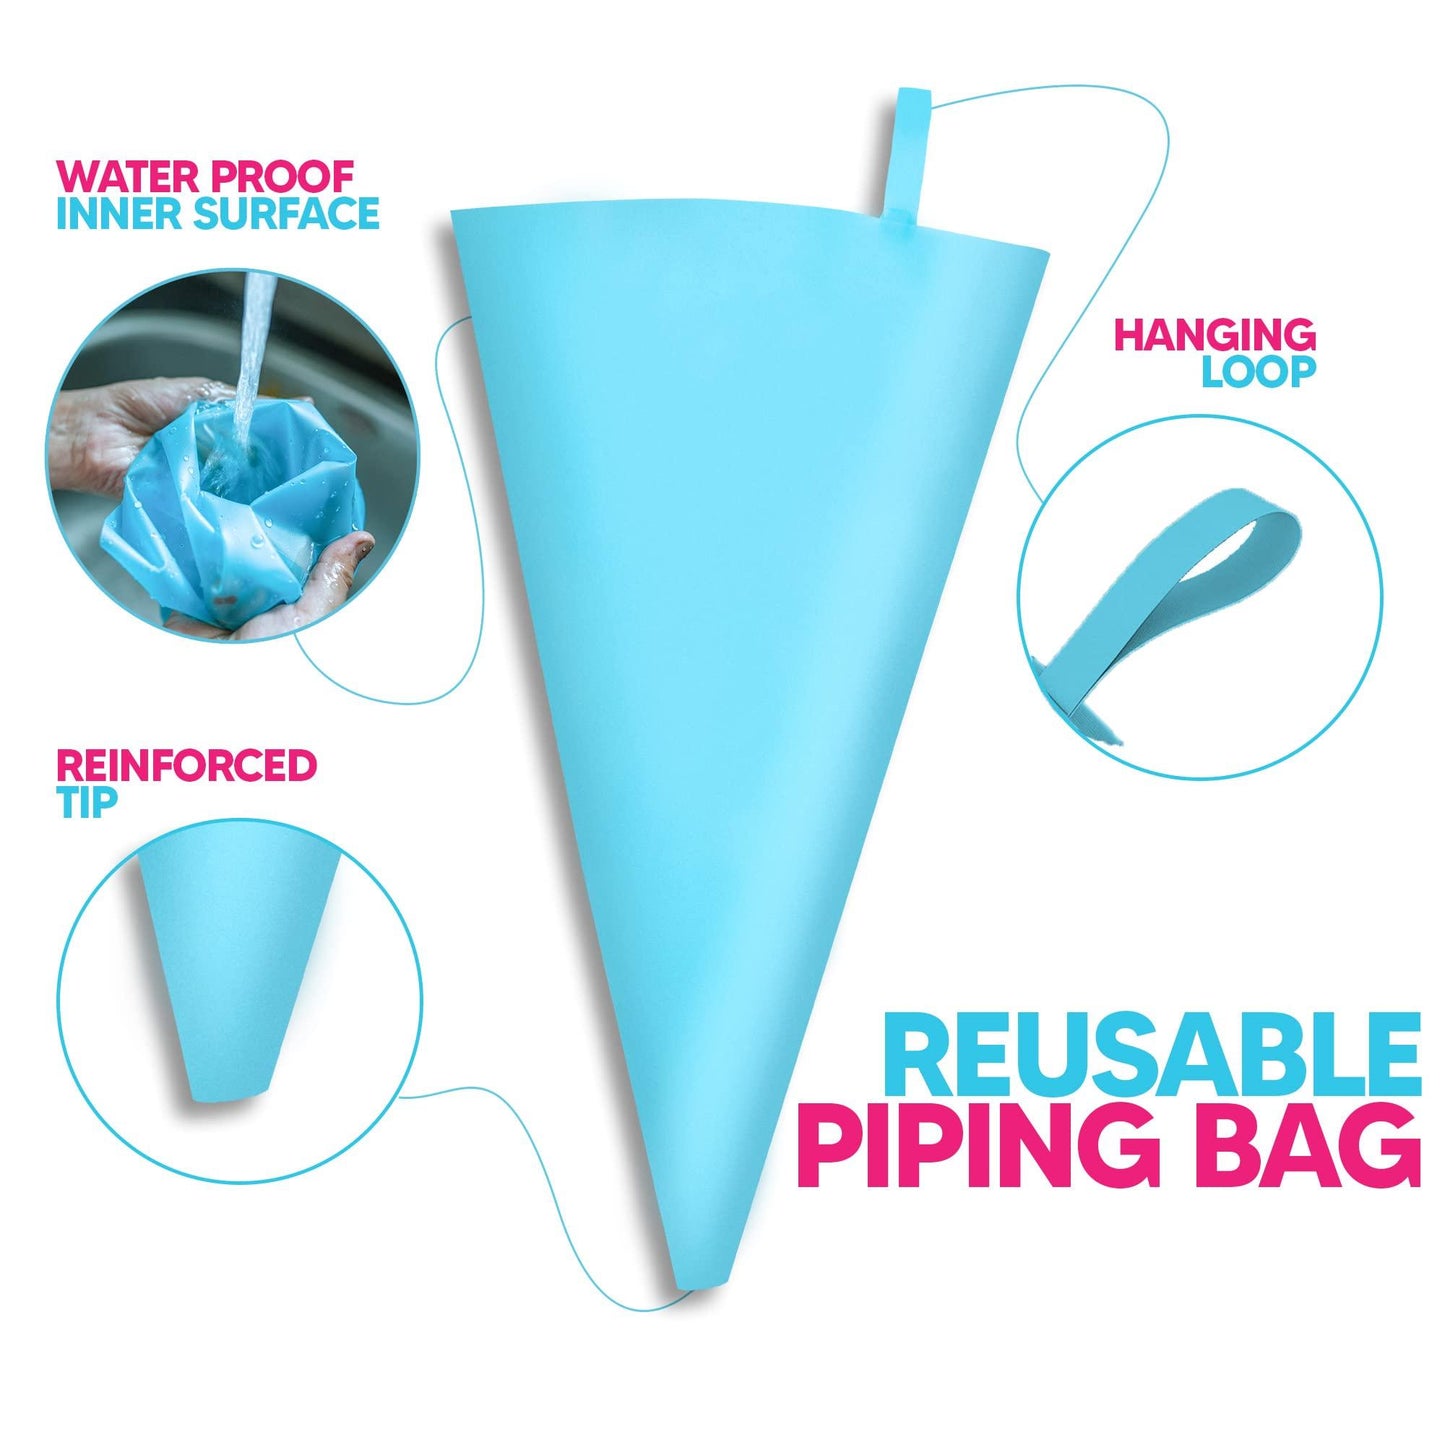 Riccle Reusable Piping Bag and Tips Set - Strong Silicone Icing Bag and Tips - Ideal Icing Piping Kit of 2 Reusable Pastry Bag,2 Coupler, 10 Icing and Frosting Tips with 2 Bag Ties - CookCave